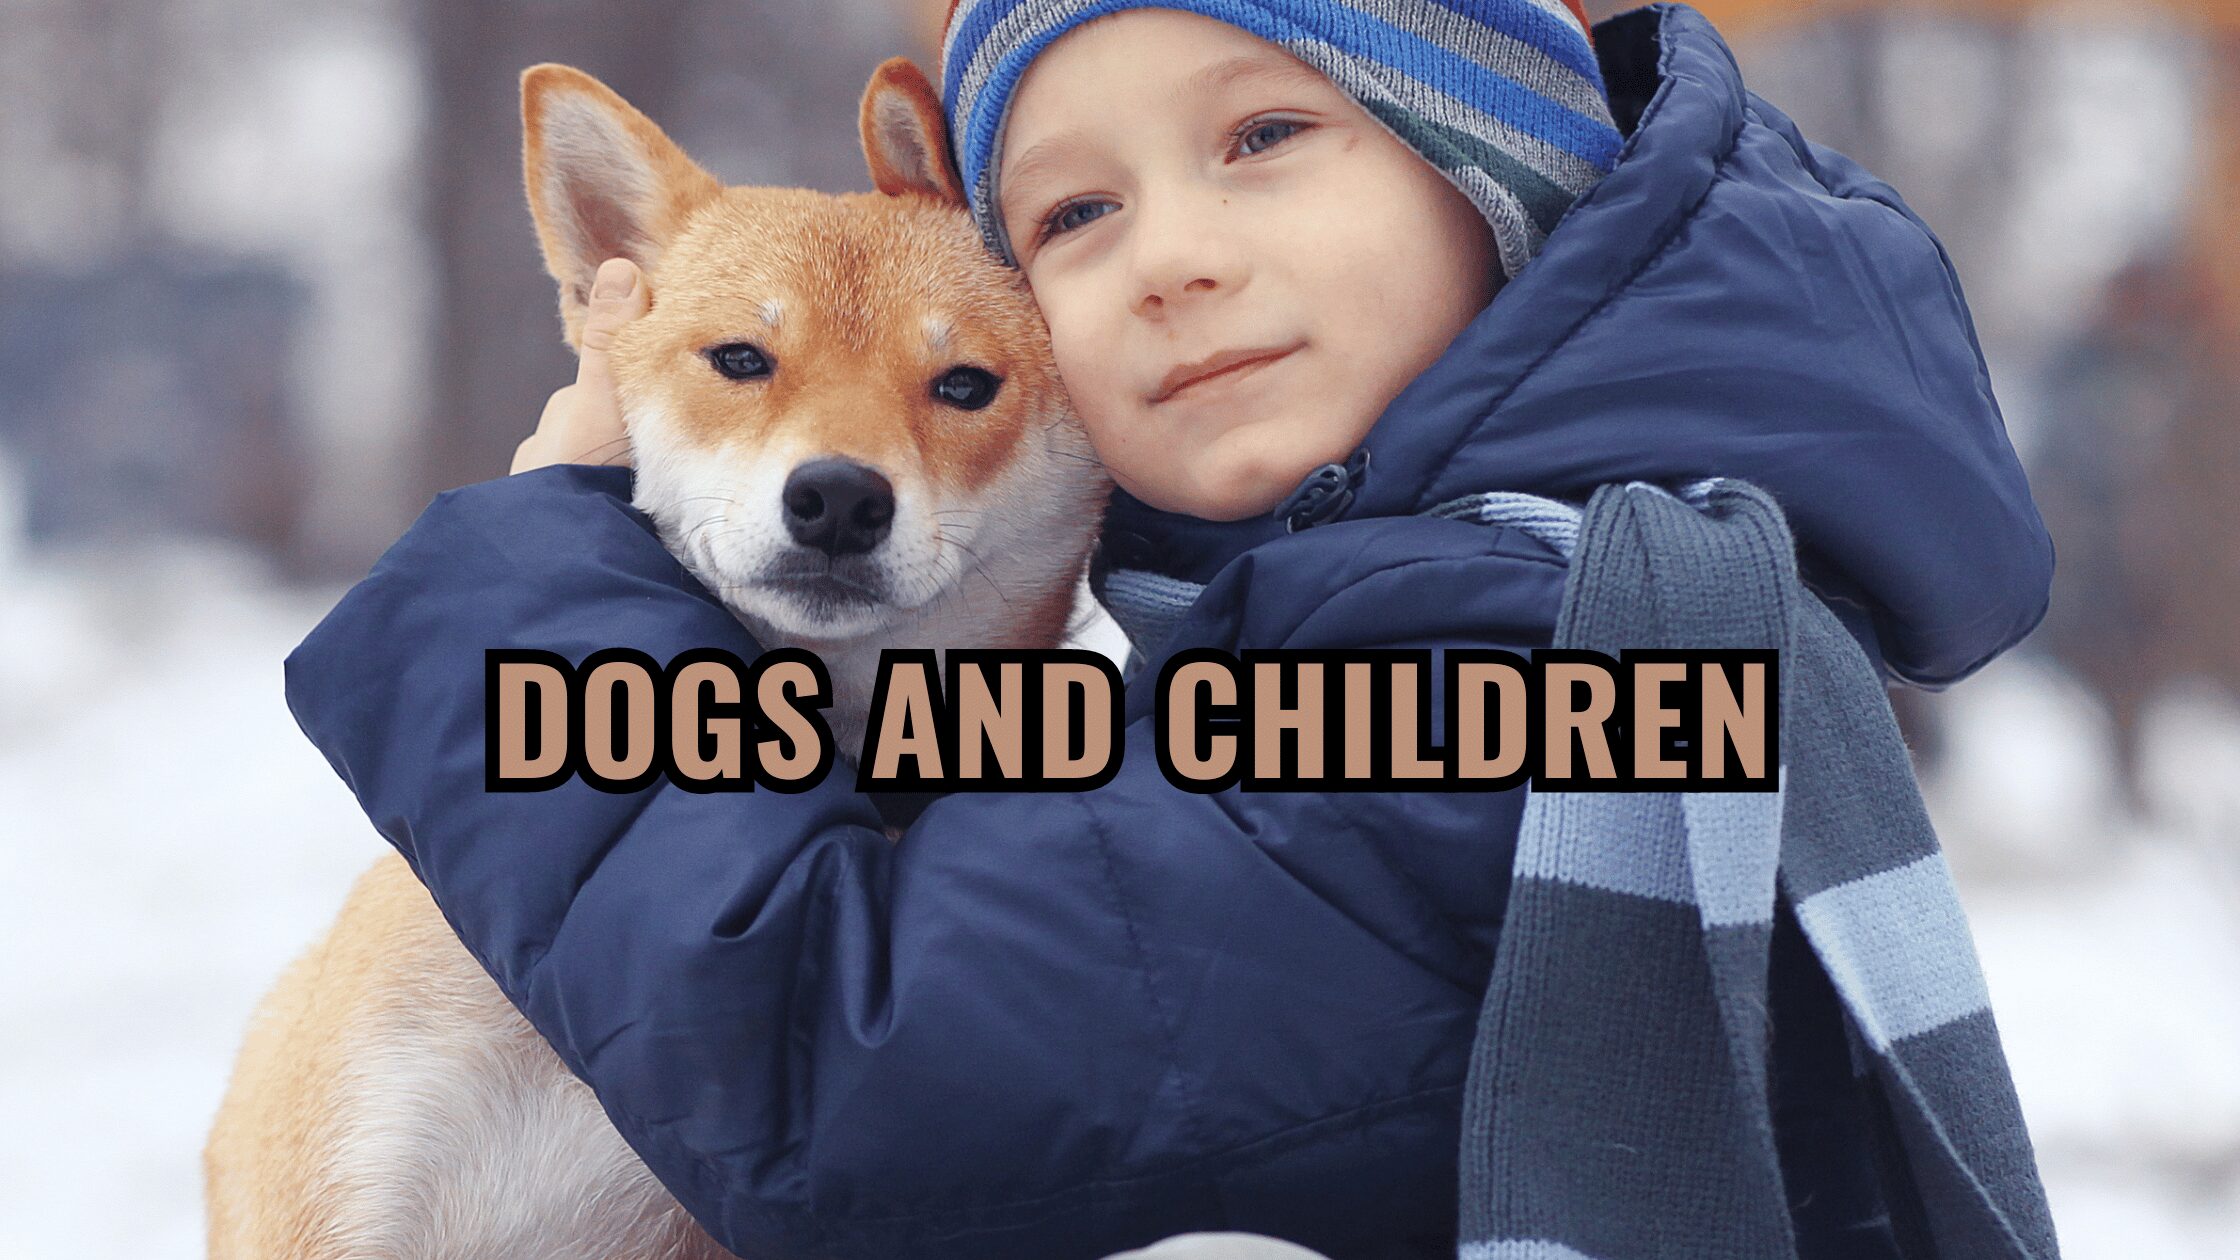 Dogs and Children: How to Safely Foster the Bond between Dogs and Children